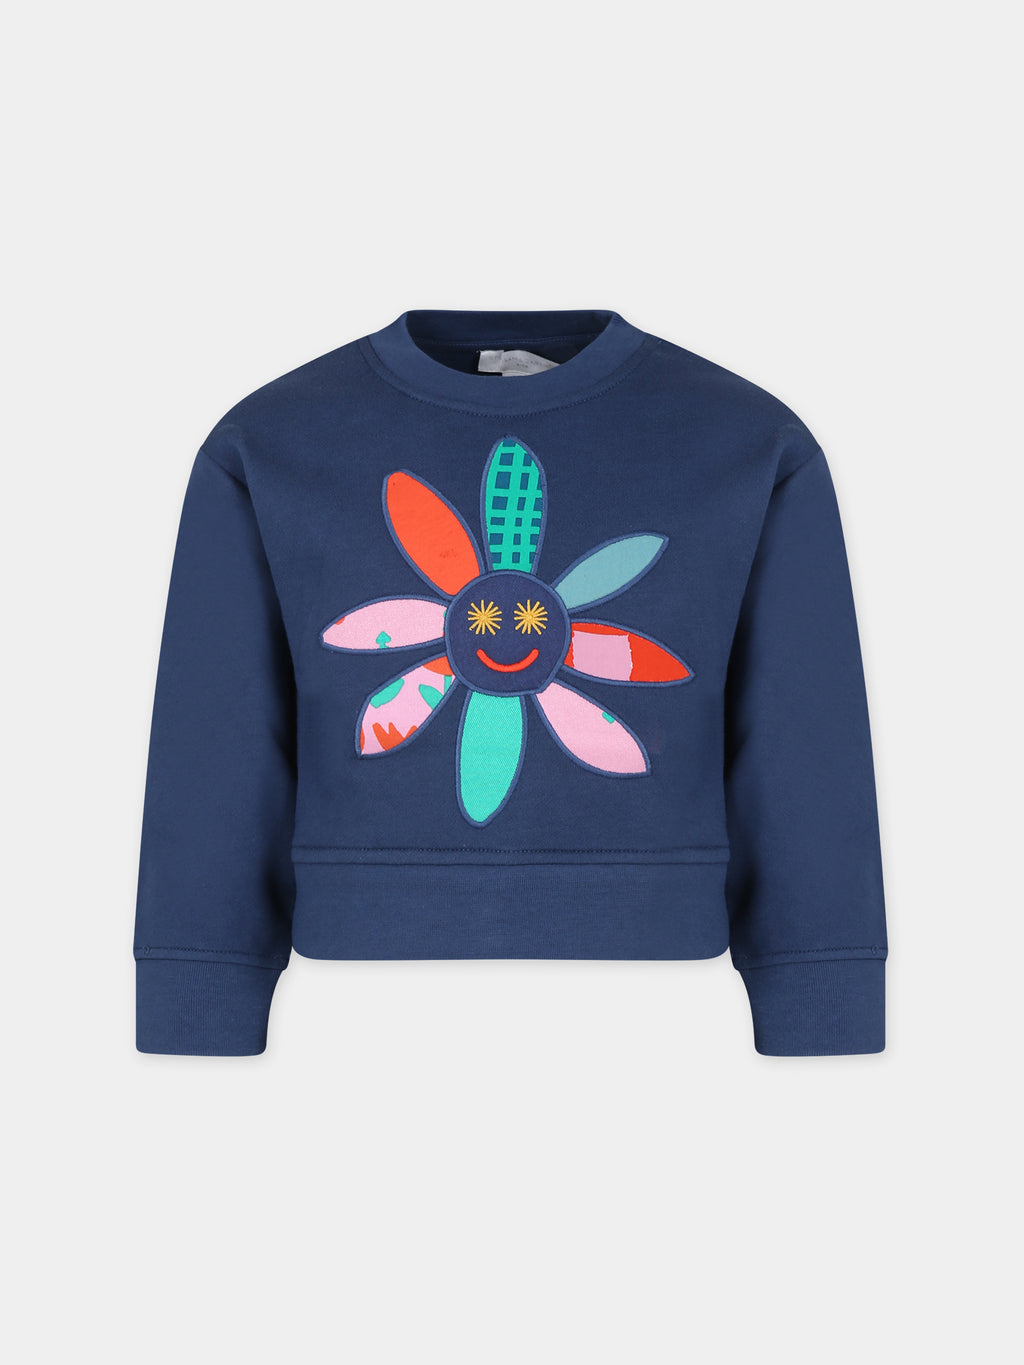 Blue sweatshirt for girl with flower